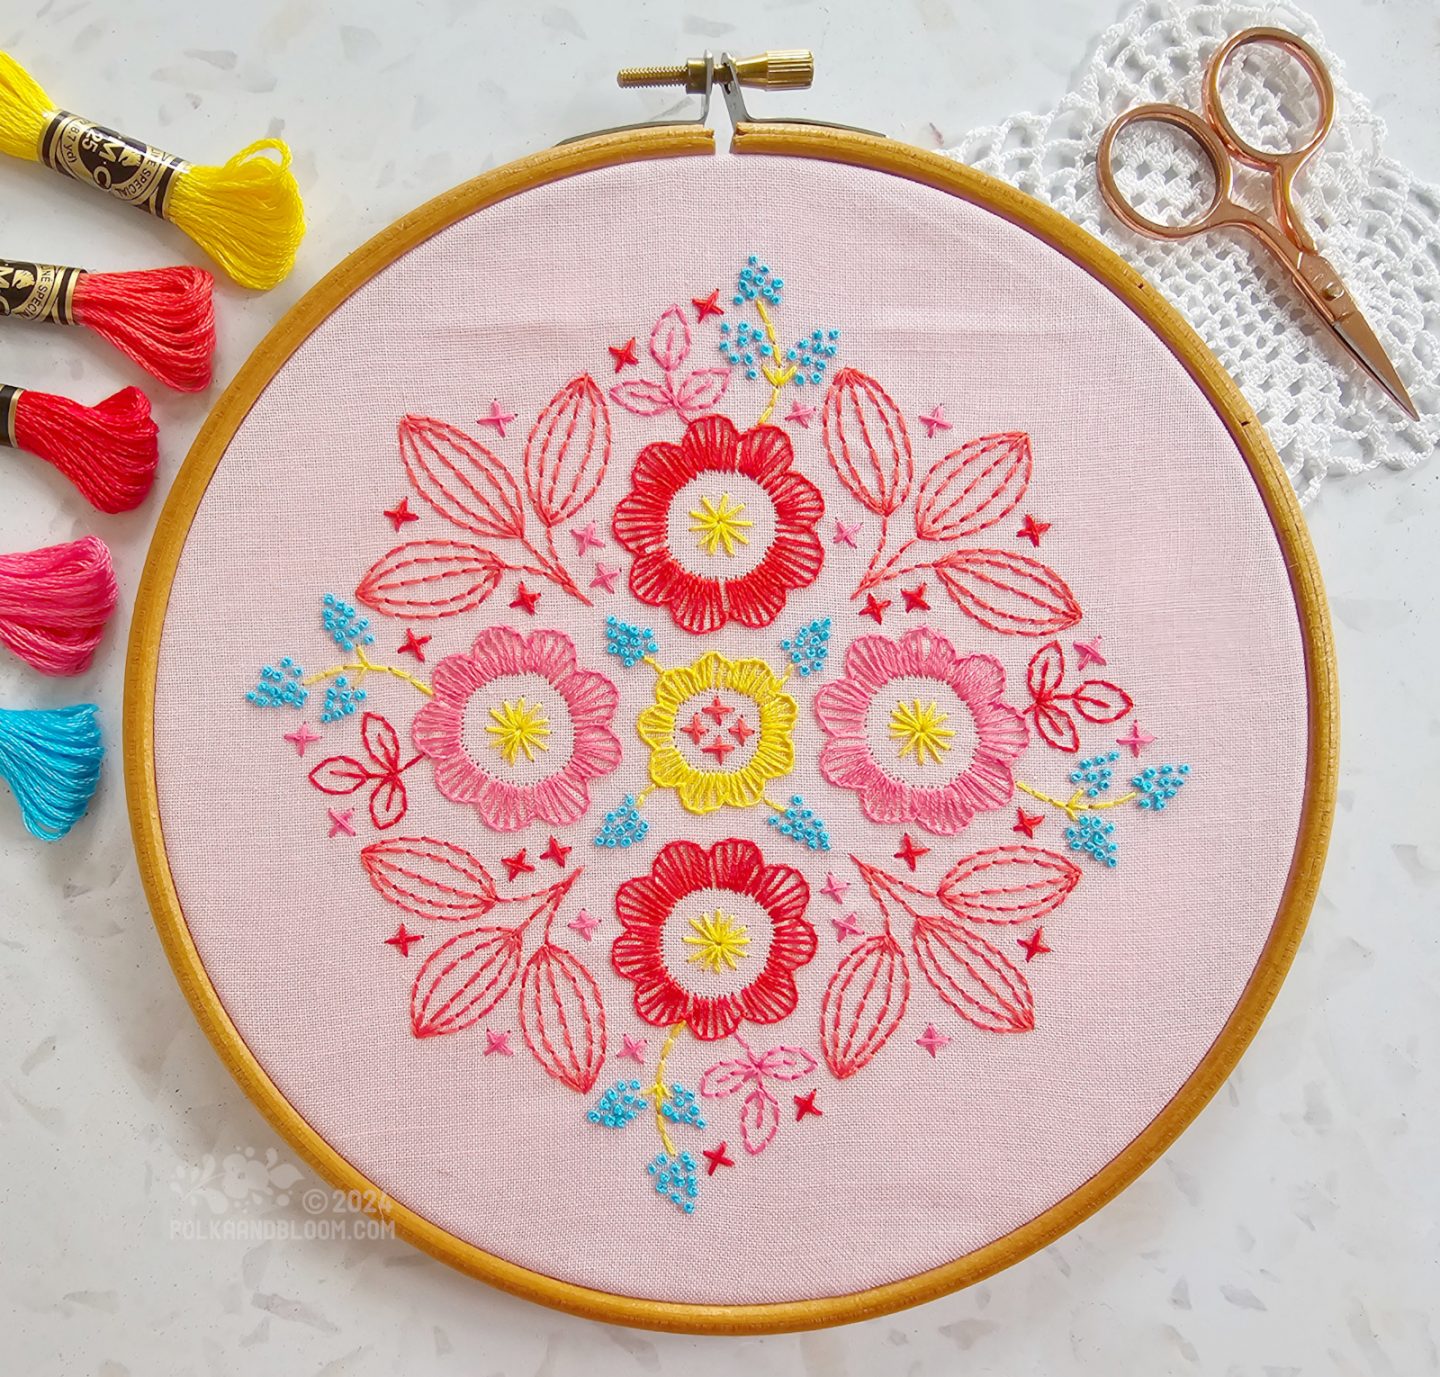 Overhead view of an embroidery in red, pink, turquoise and yellow colours on a pink fabric background.